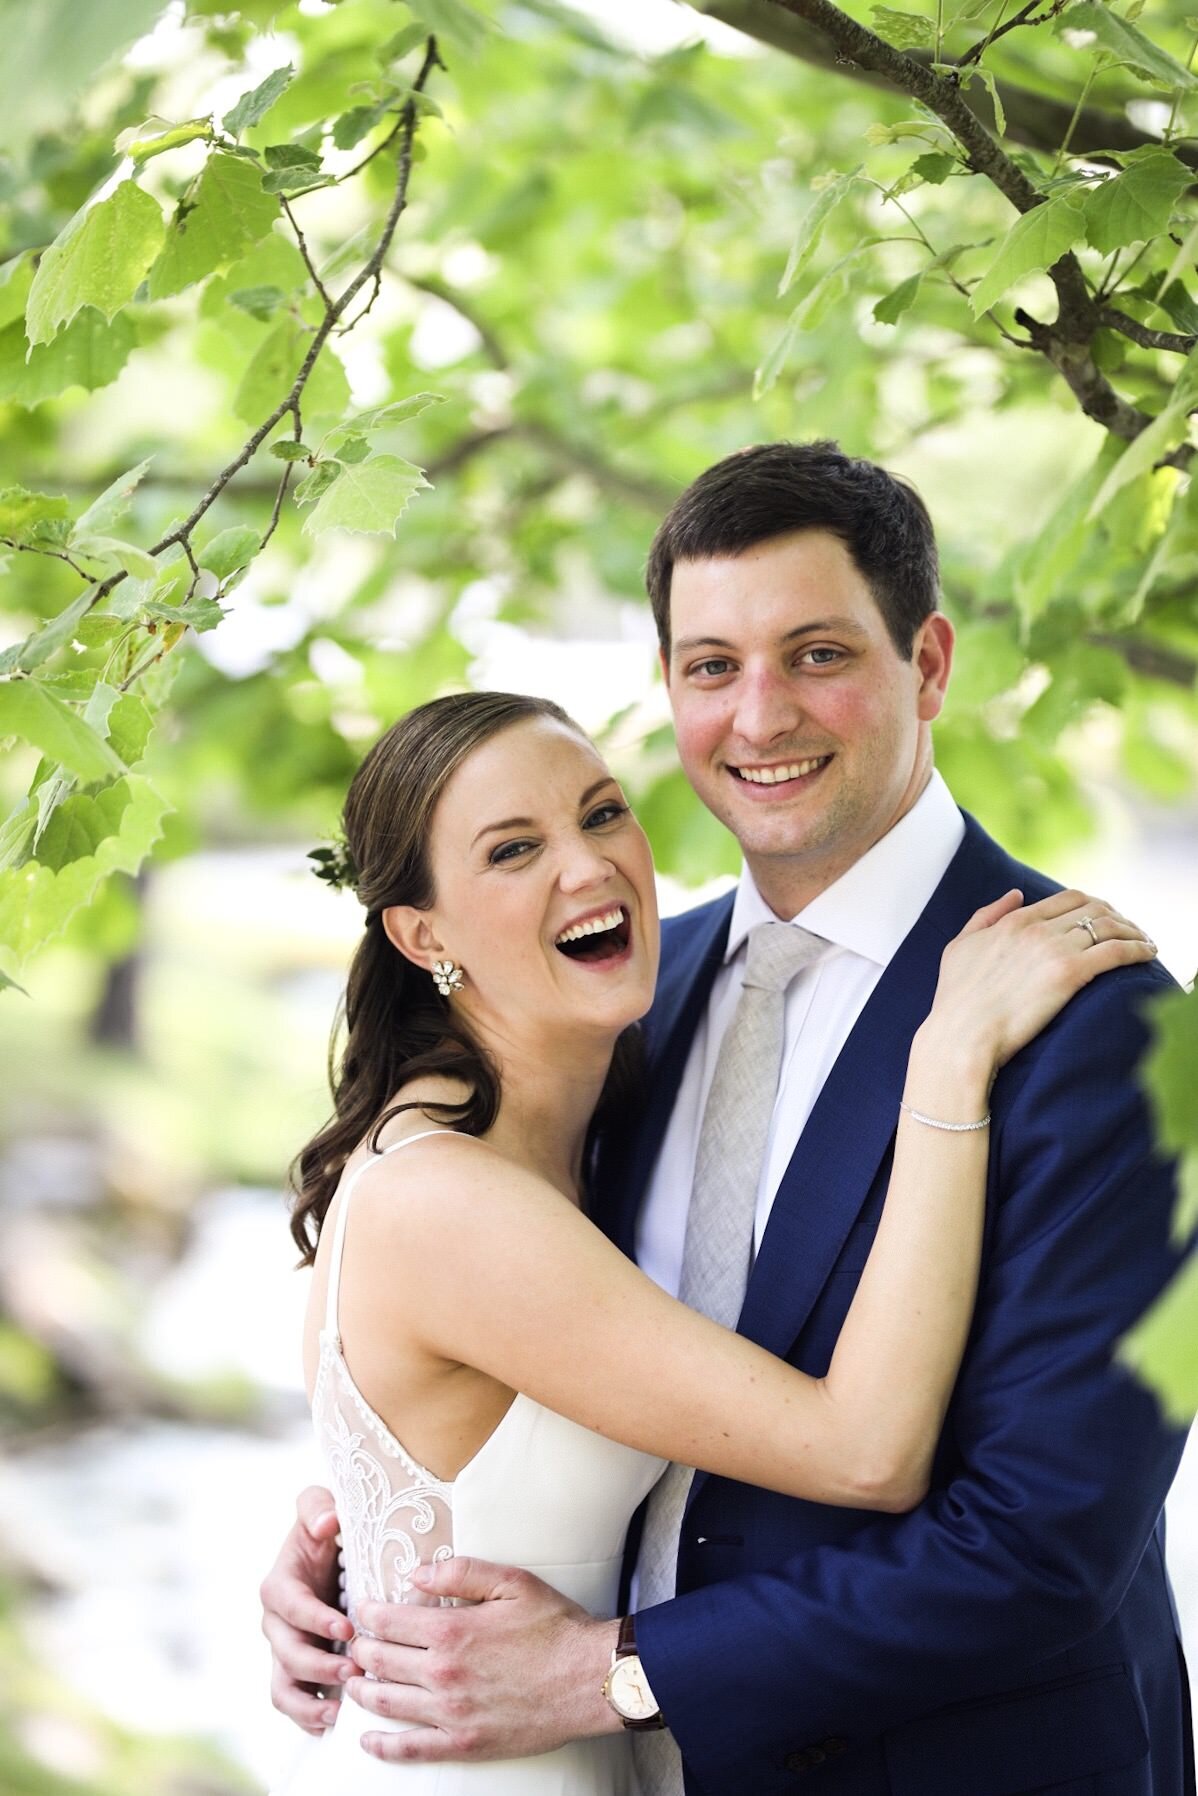 Bride and groom smiling and embracing under a tree in Richmond VA Shawnee Custalow Queer Wedding Photographer